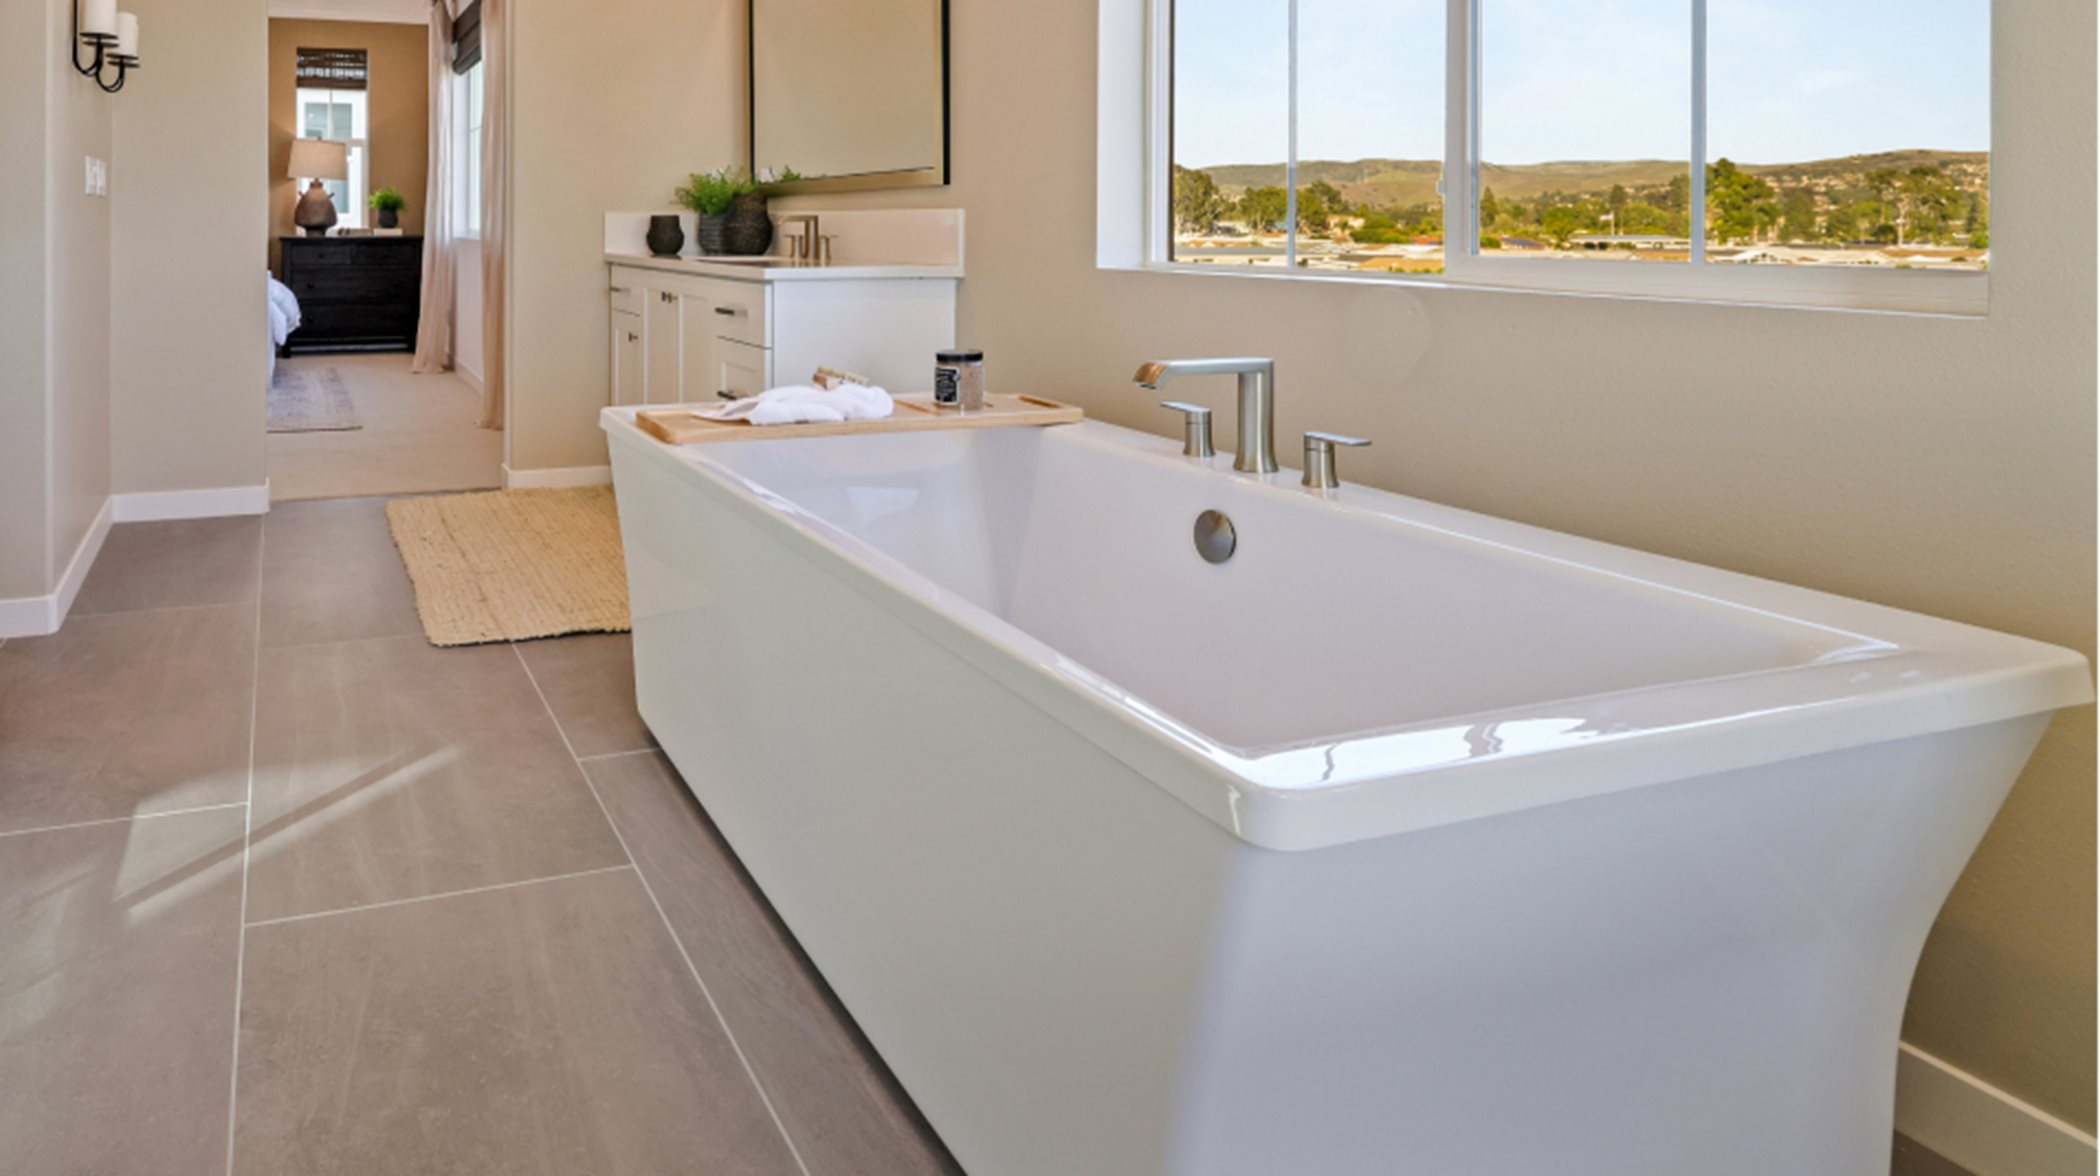 Freestanding tub in the owner's suite